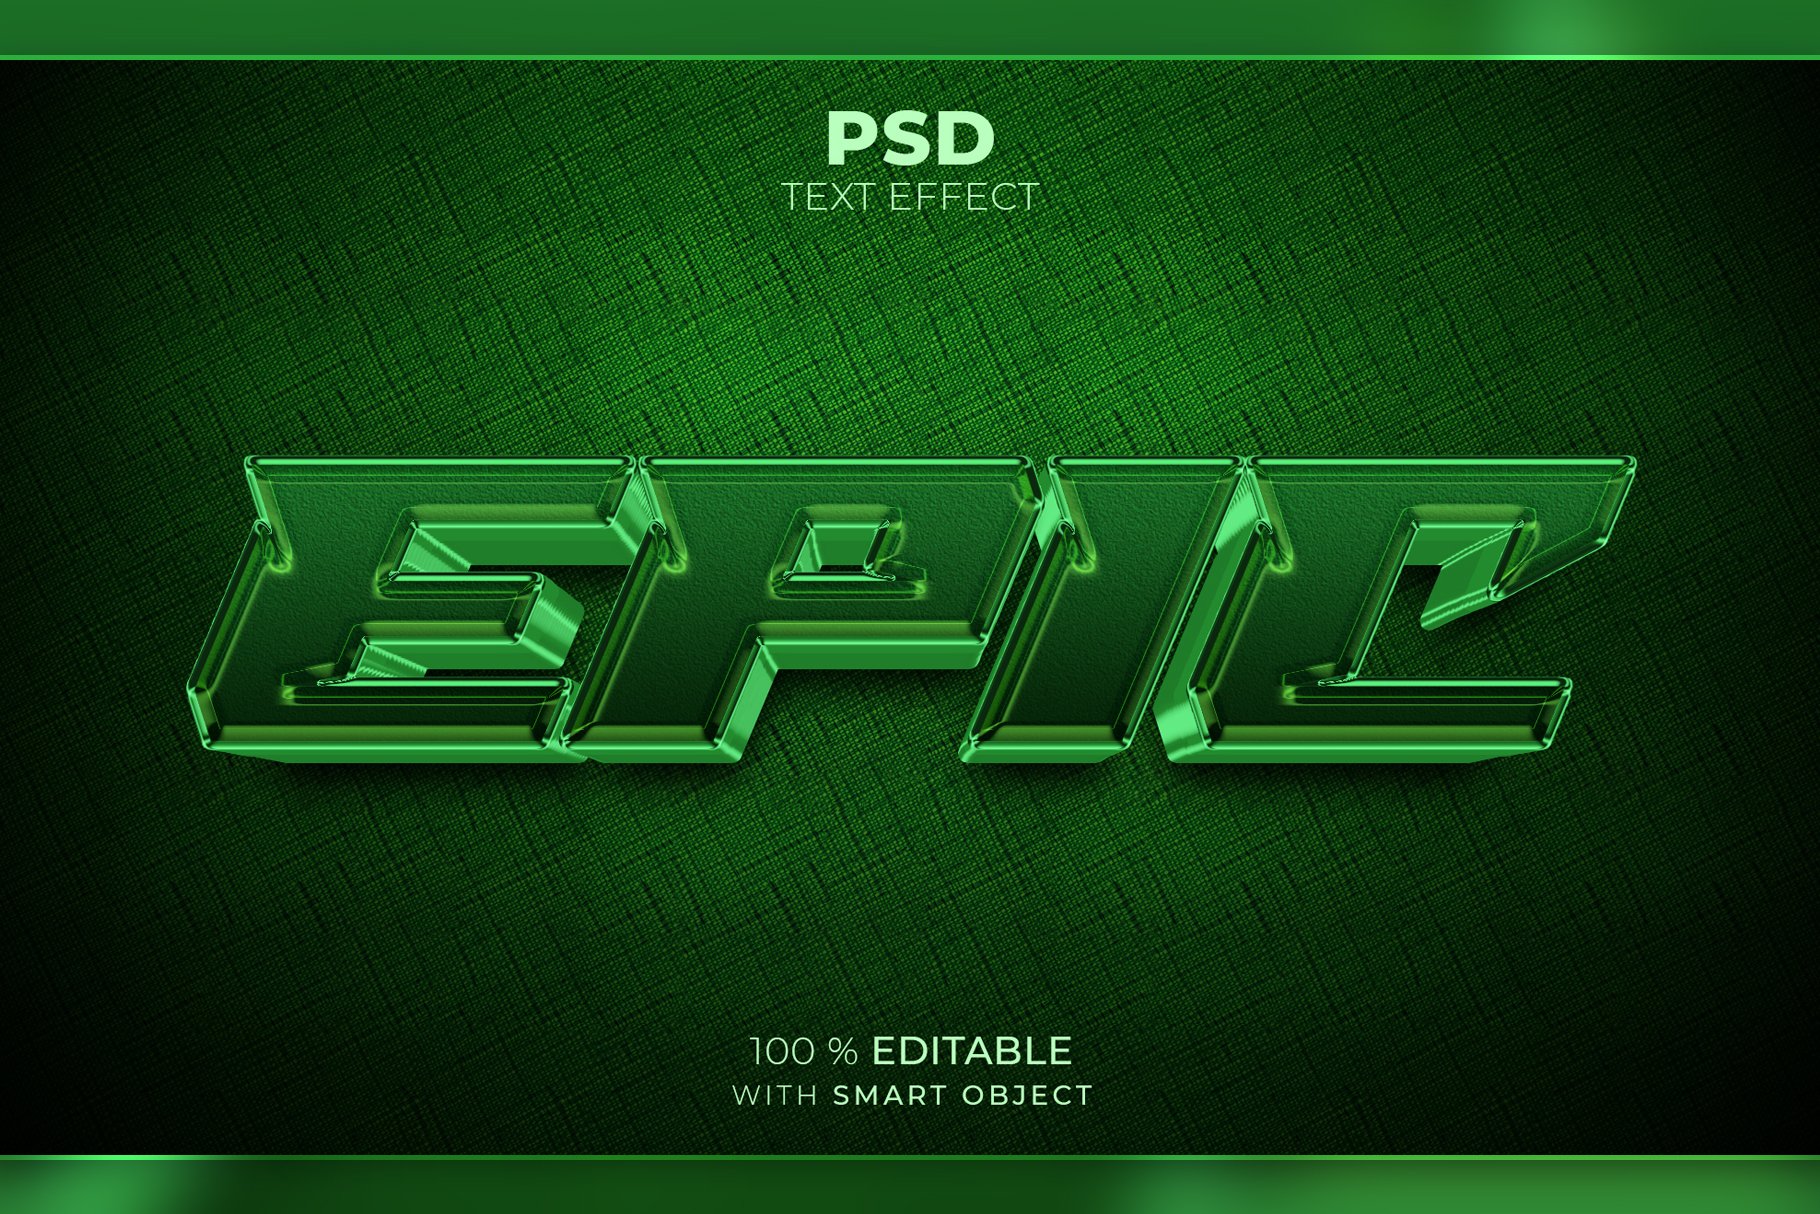 Epic 3D editable text effectcover image.